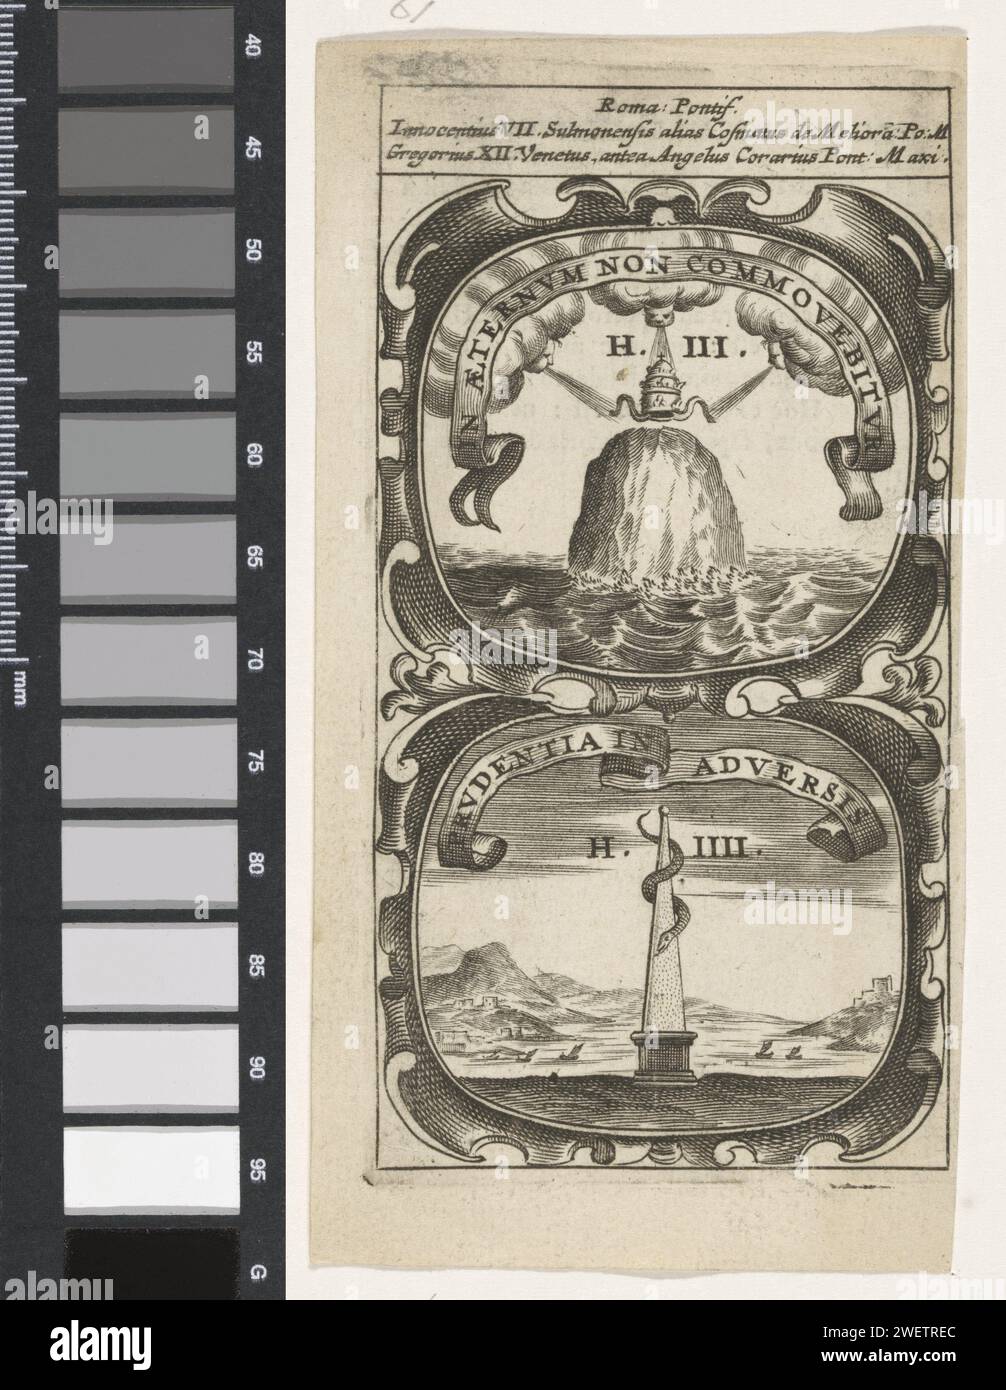 Tiara above a rock in the water / obelisk with snake, anonymous, after aegidius sadeler (II), 1666 print An emblem with two performances. Above, three winds hold a tiara above a rock in the water. Under a landscape with an obelisk around which a snake winds. These are the currents of Pope Innocentius VII and Gregorius XII.  paper engraving / letterpress printing diadem, tiara. wind as a human face, blowing with rounded cheeks. rocks. obelisk, needle. snakes Stock Photo